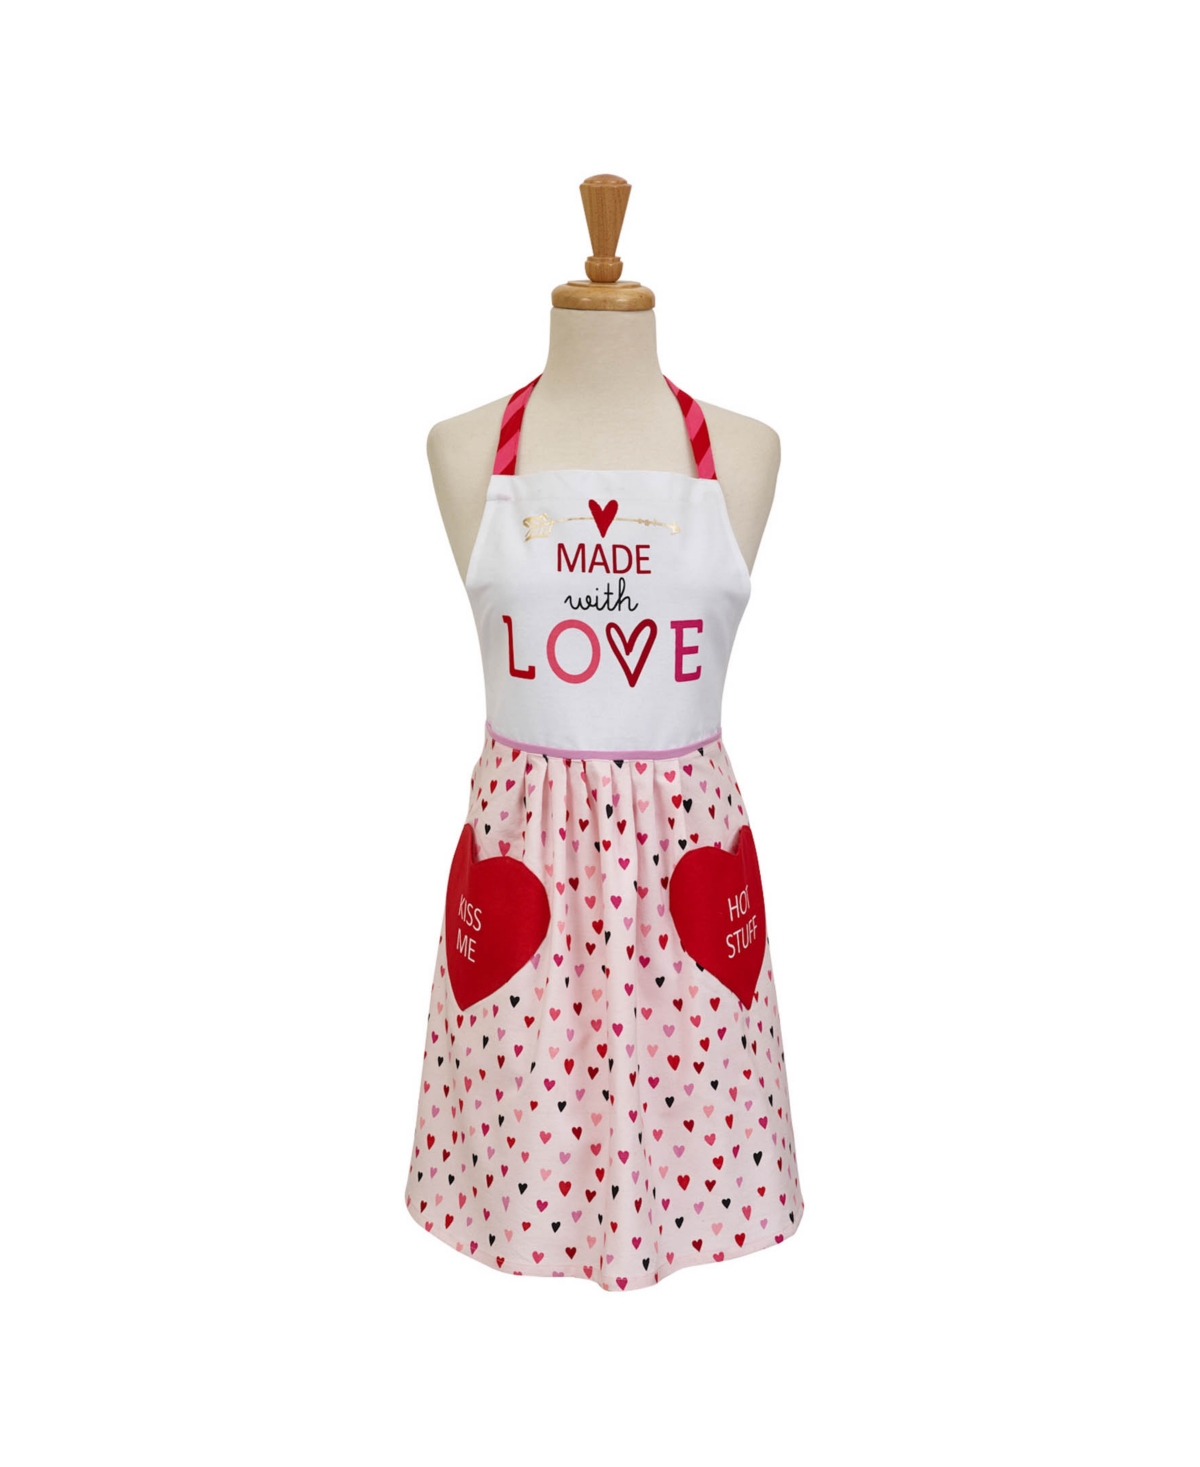 Made with Love Print Skirt Apron - Red